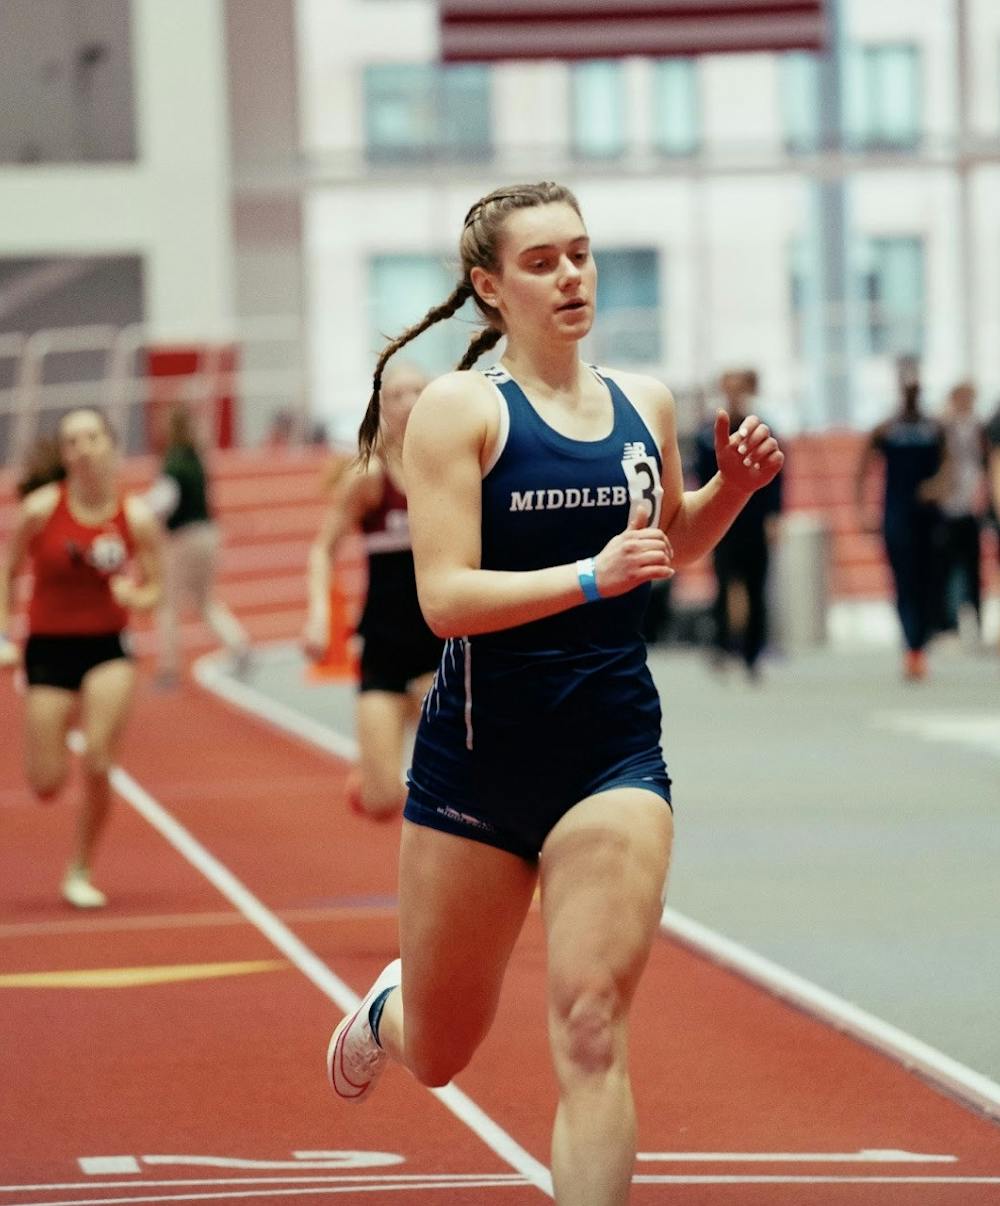 Nikky Sztachelski ’25 finishes strong in an indoor race at Boston University.